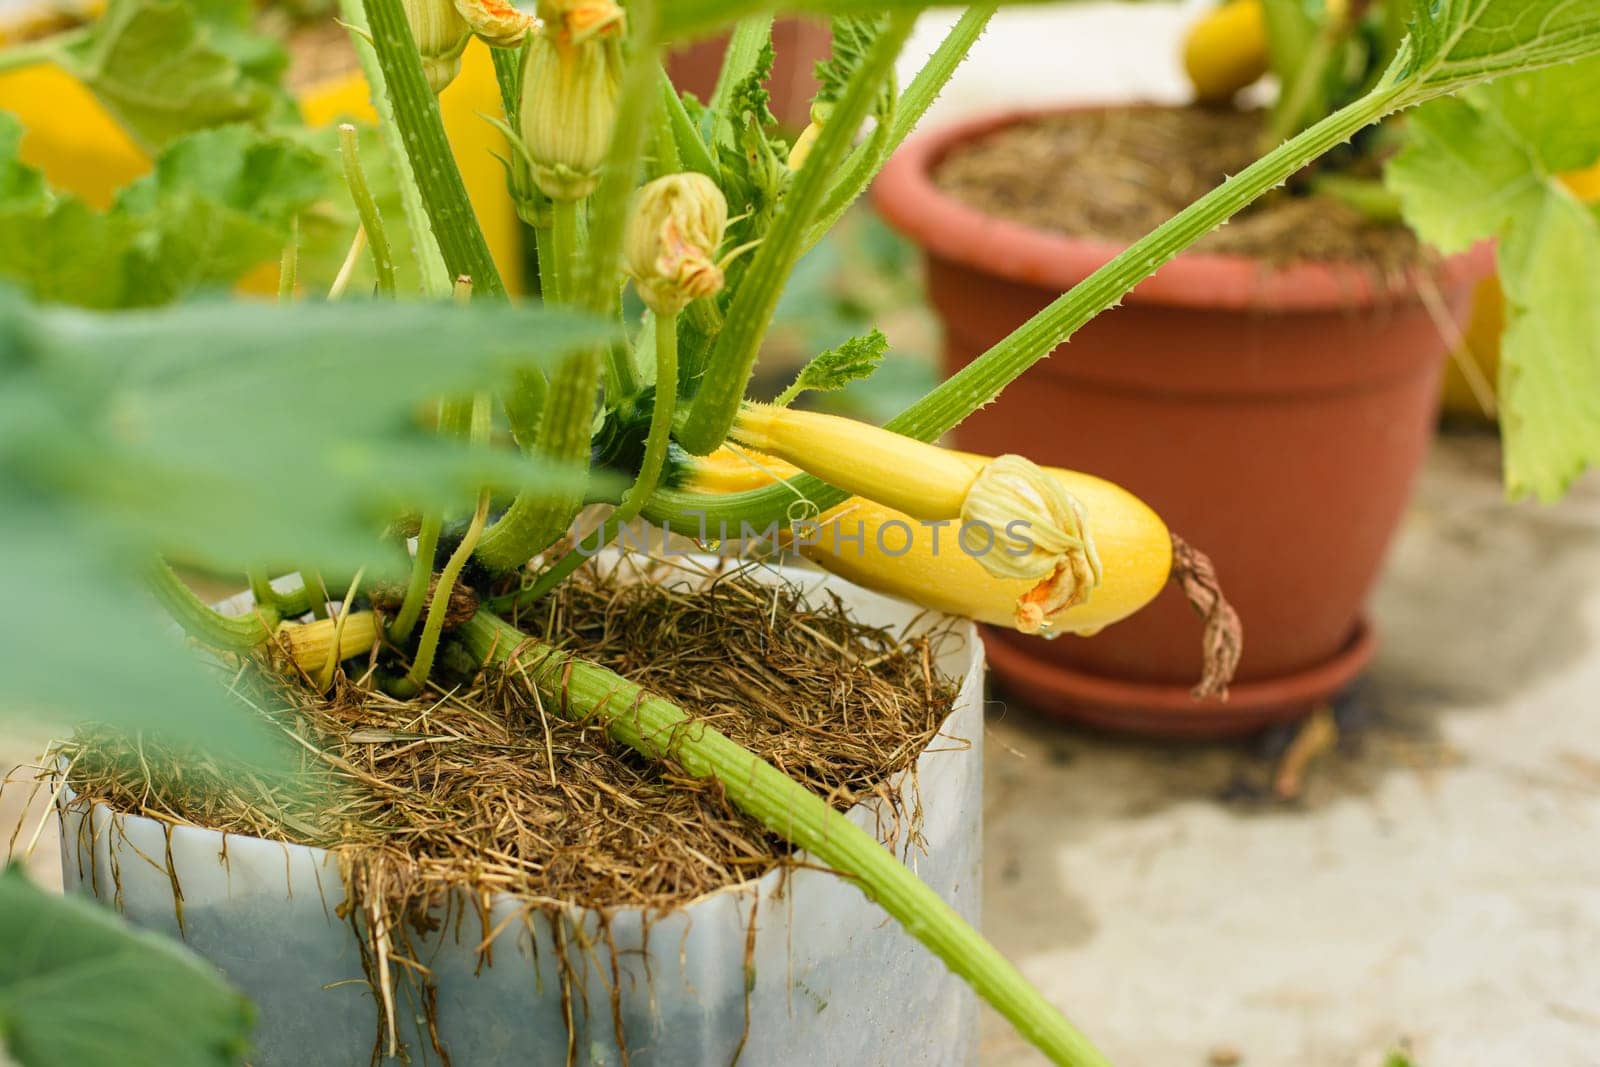 Growing yellow zucchini in plastic pots by Madhourse